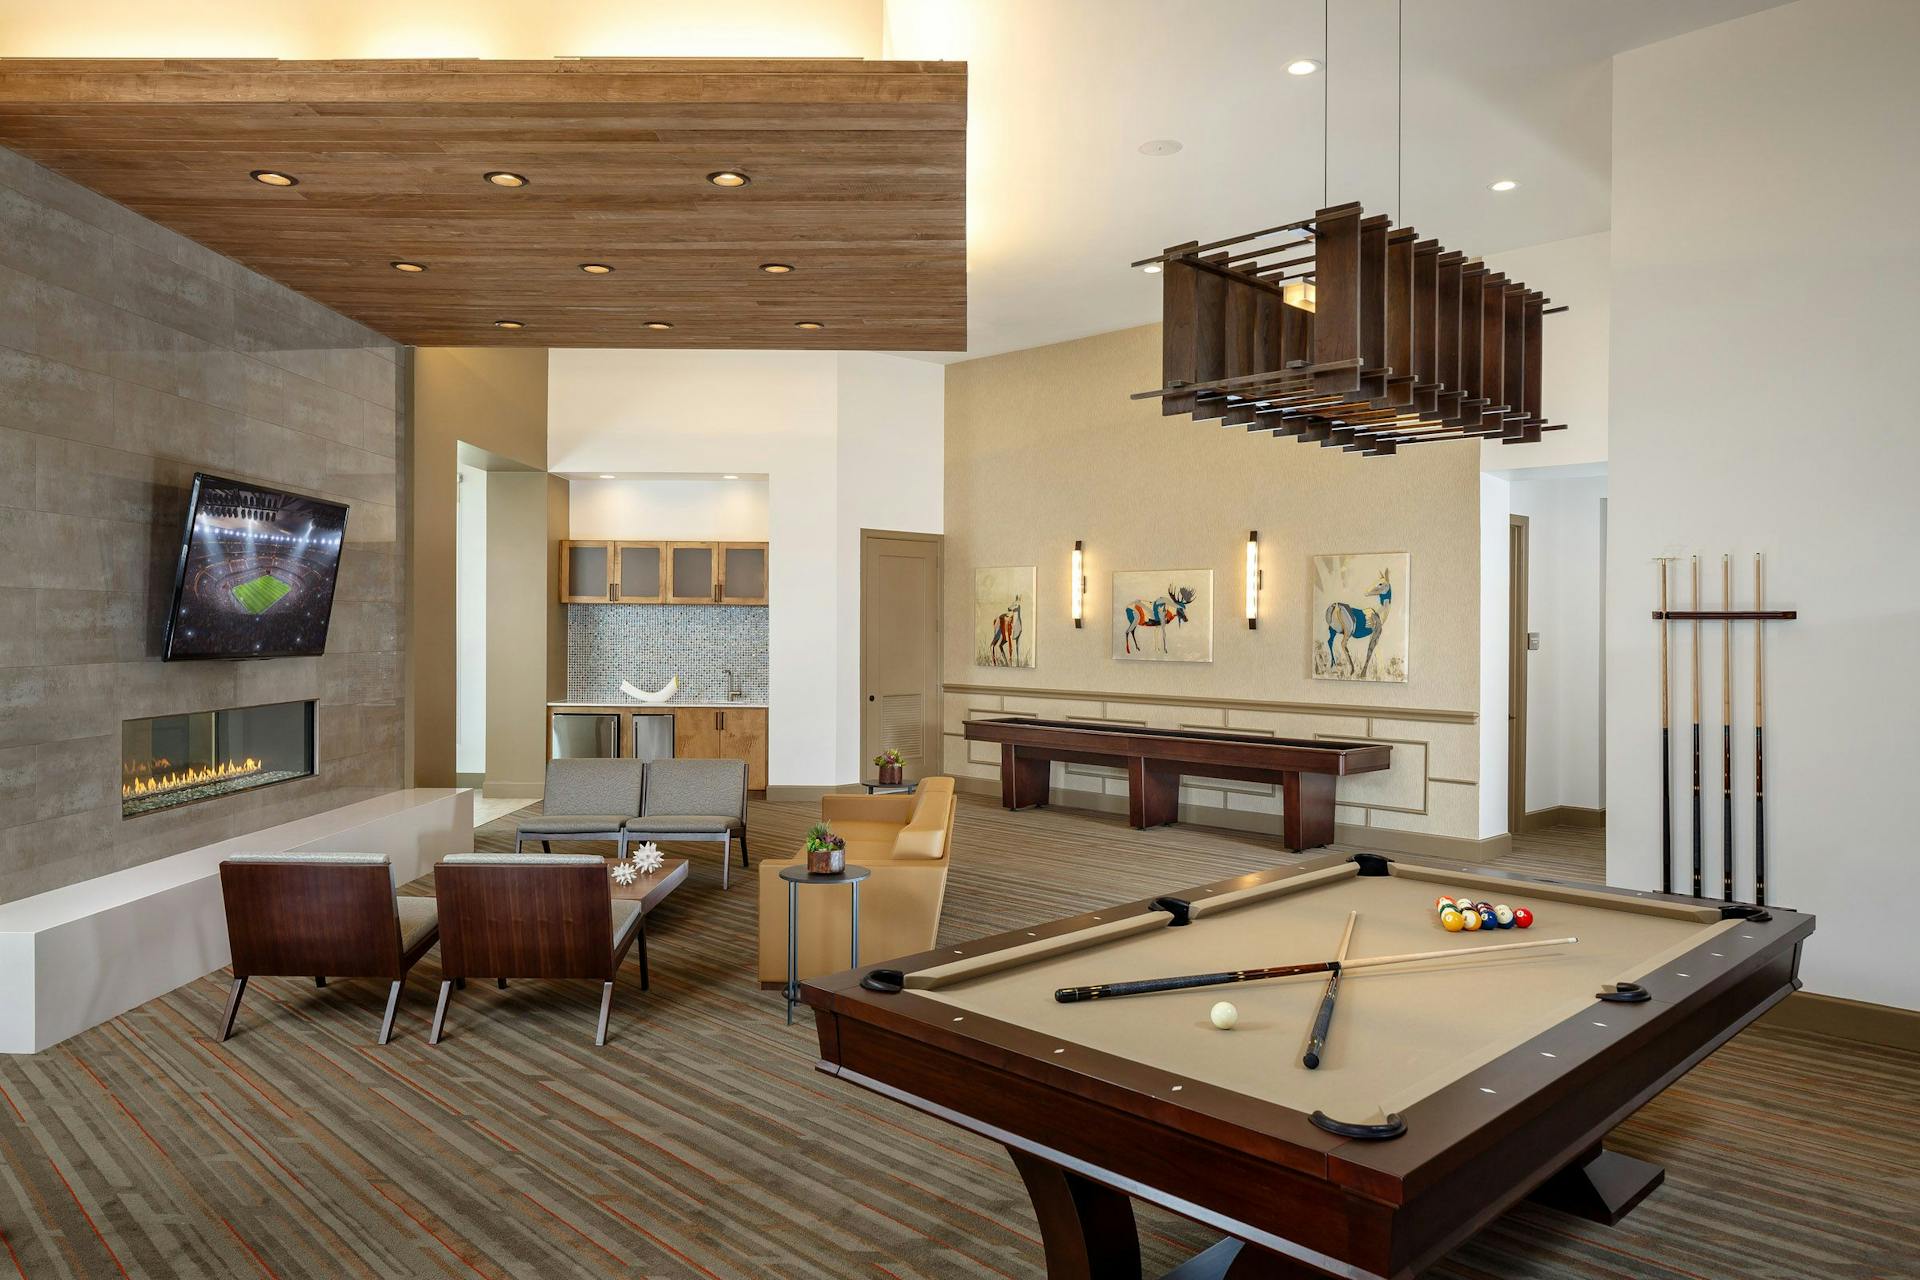 Lounge featuring pool table